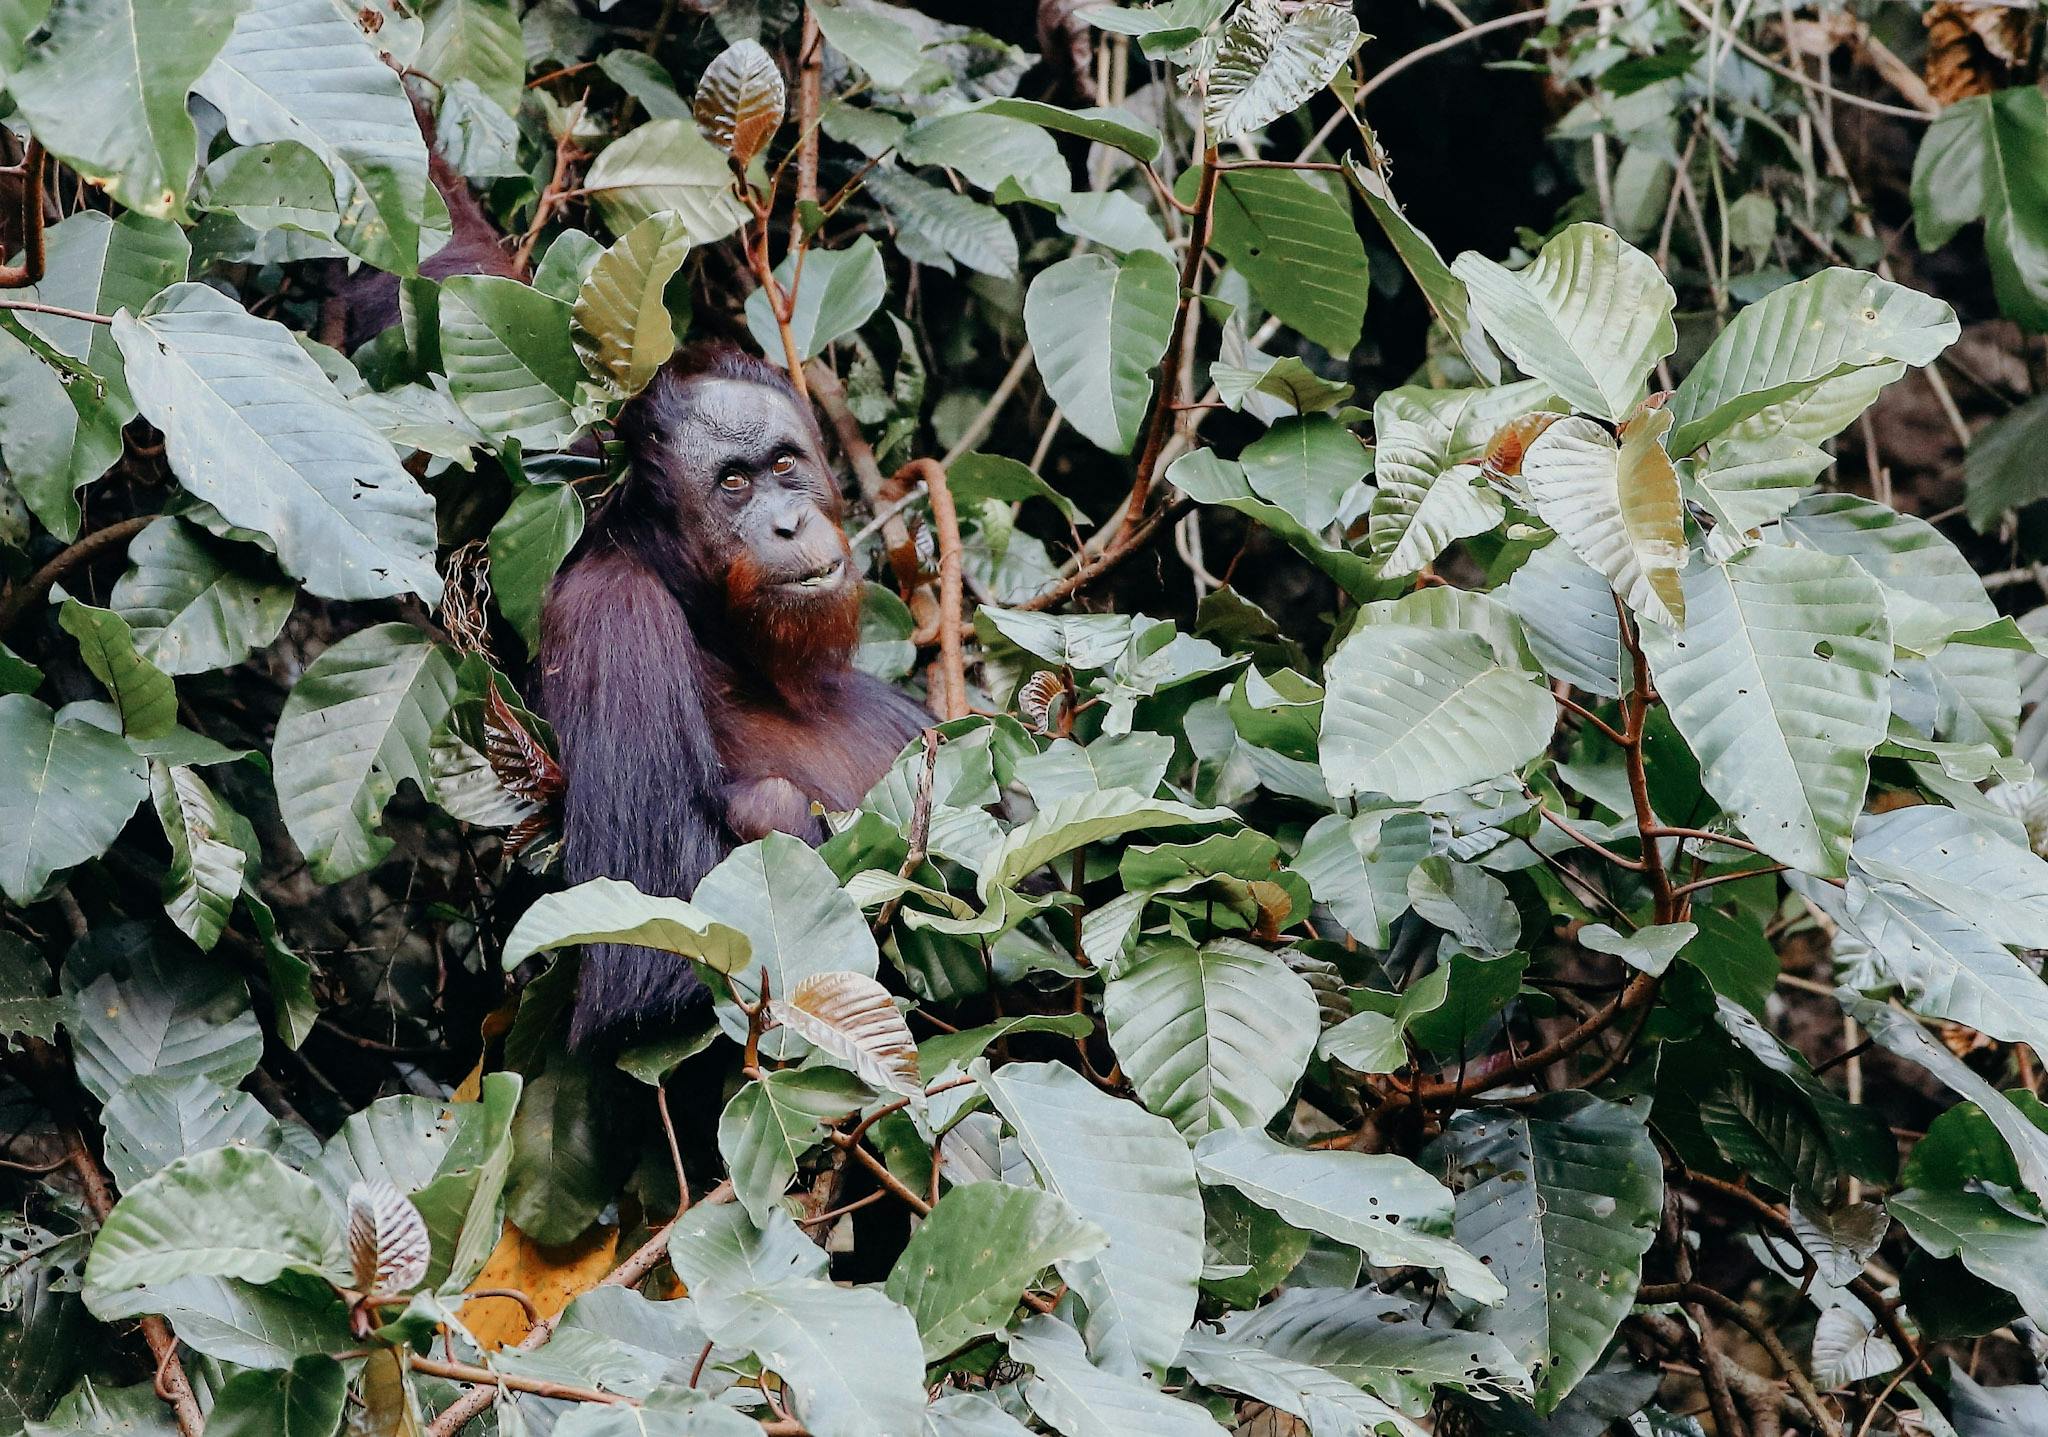 In the wild Orangutans are incredibly shy and would often be seen hiding behind branches when humans are present